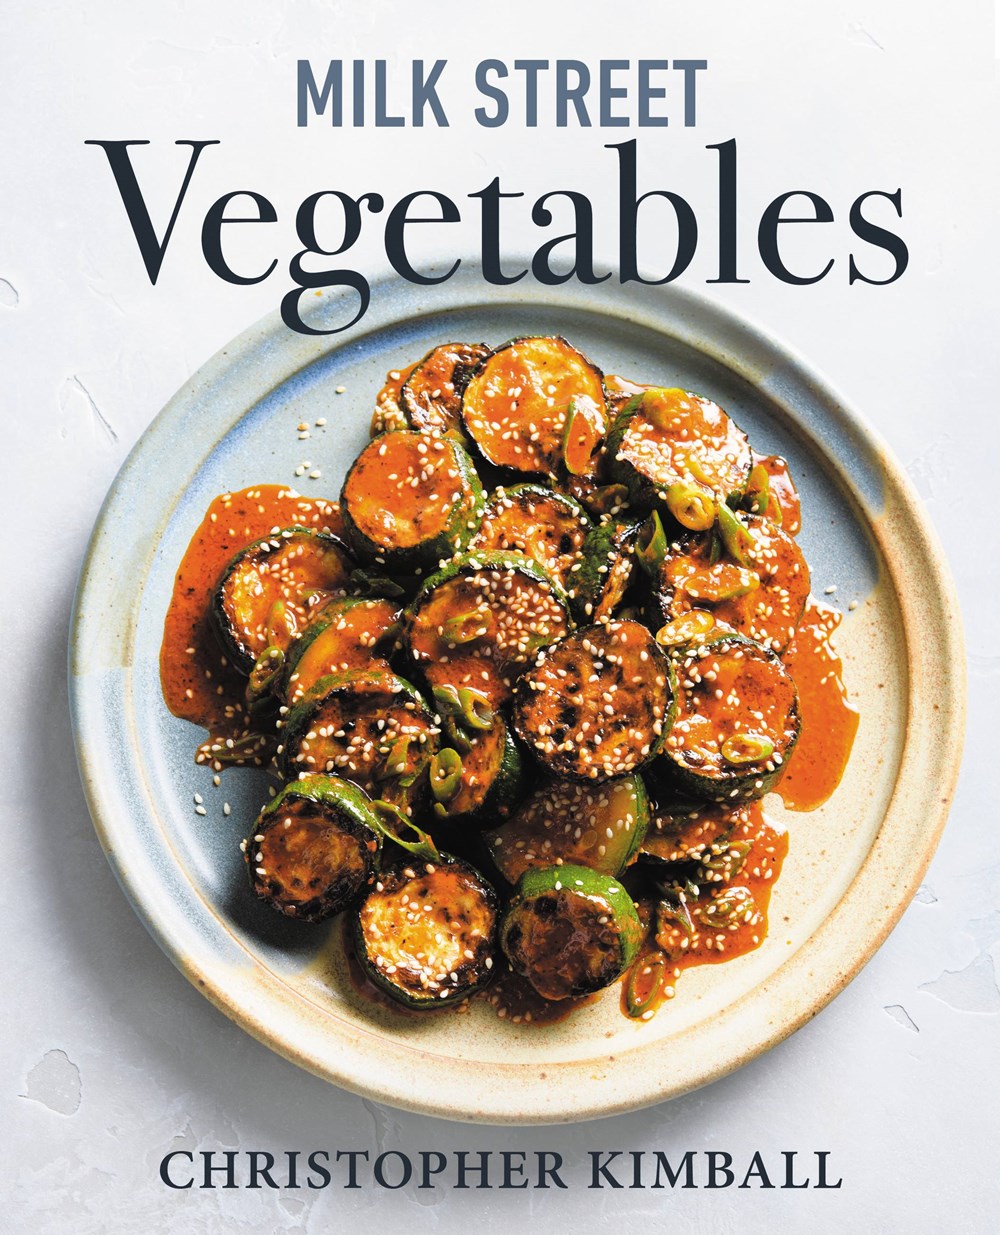 Cover of Milk Street Vegetables by Christopher Kimball